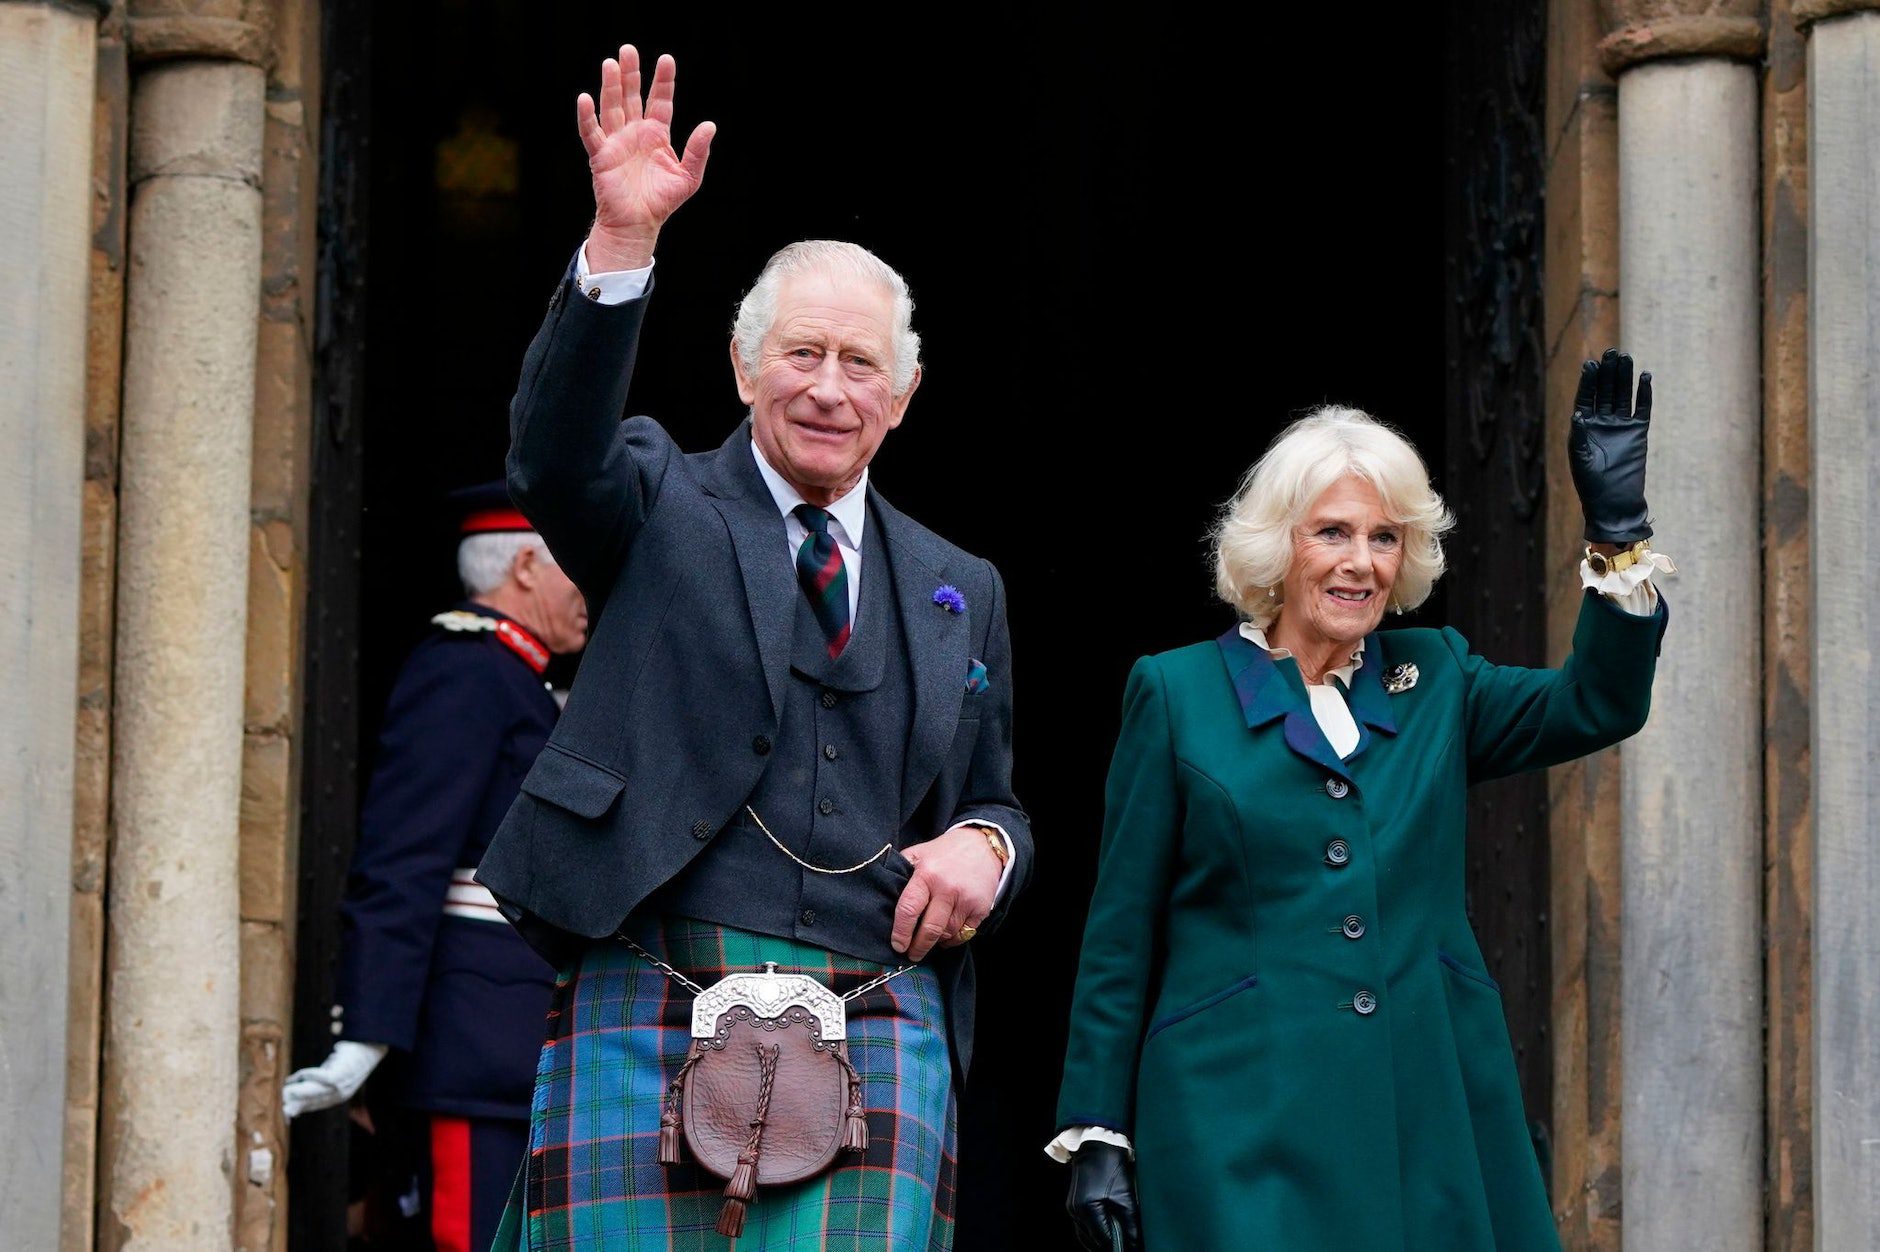 King Charles III and Queen Camilla leaving the abbey in Dunfermline, Scotland.  